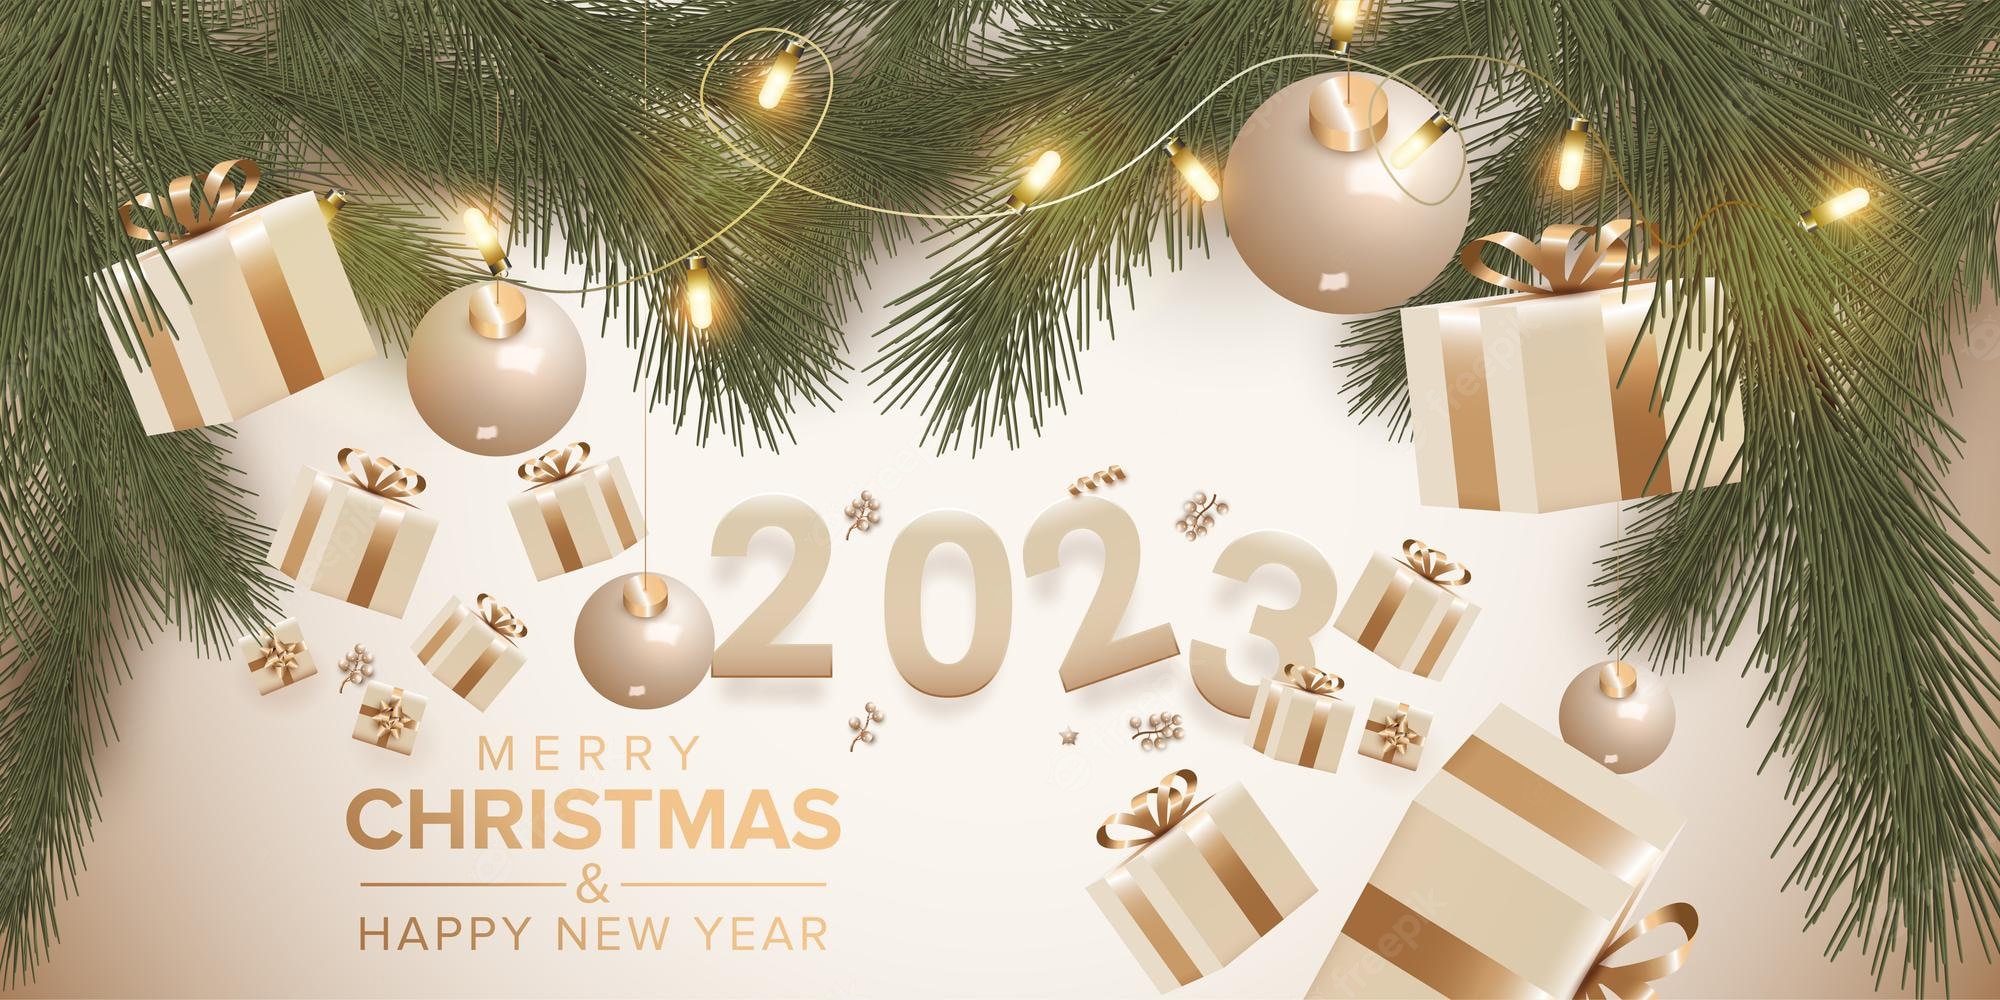 Merry Christmas and Happy New Year 2023 Wishes Images